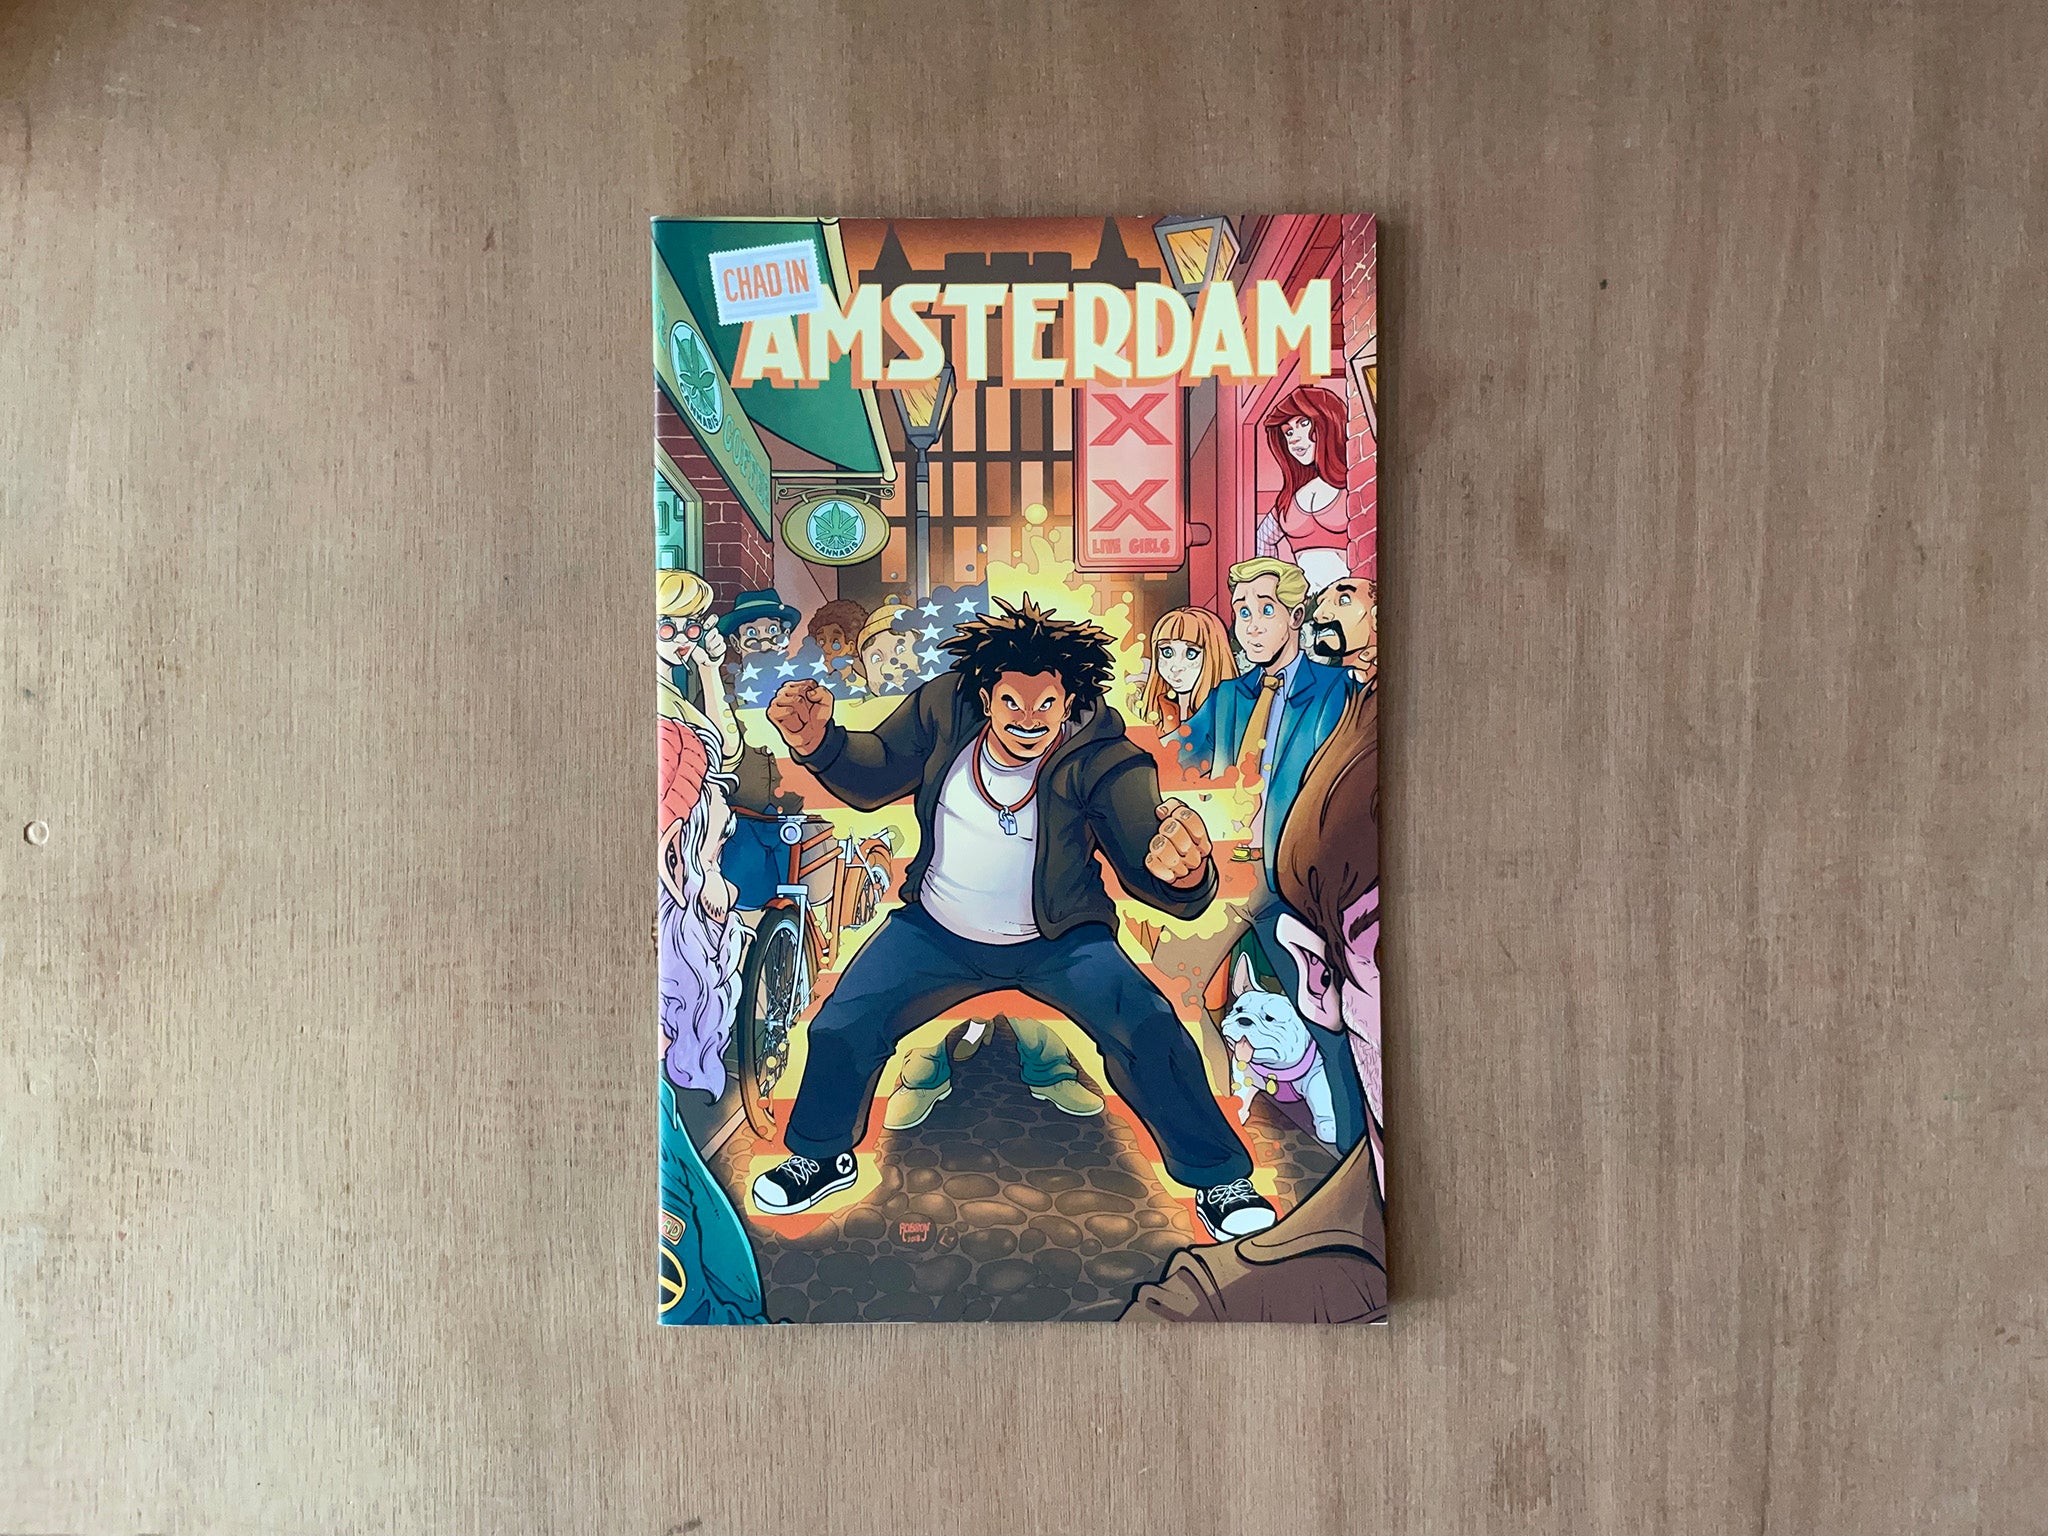 CHAD IN AMSTERDAM NO. 3 by Various Artists